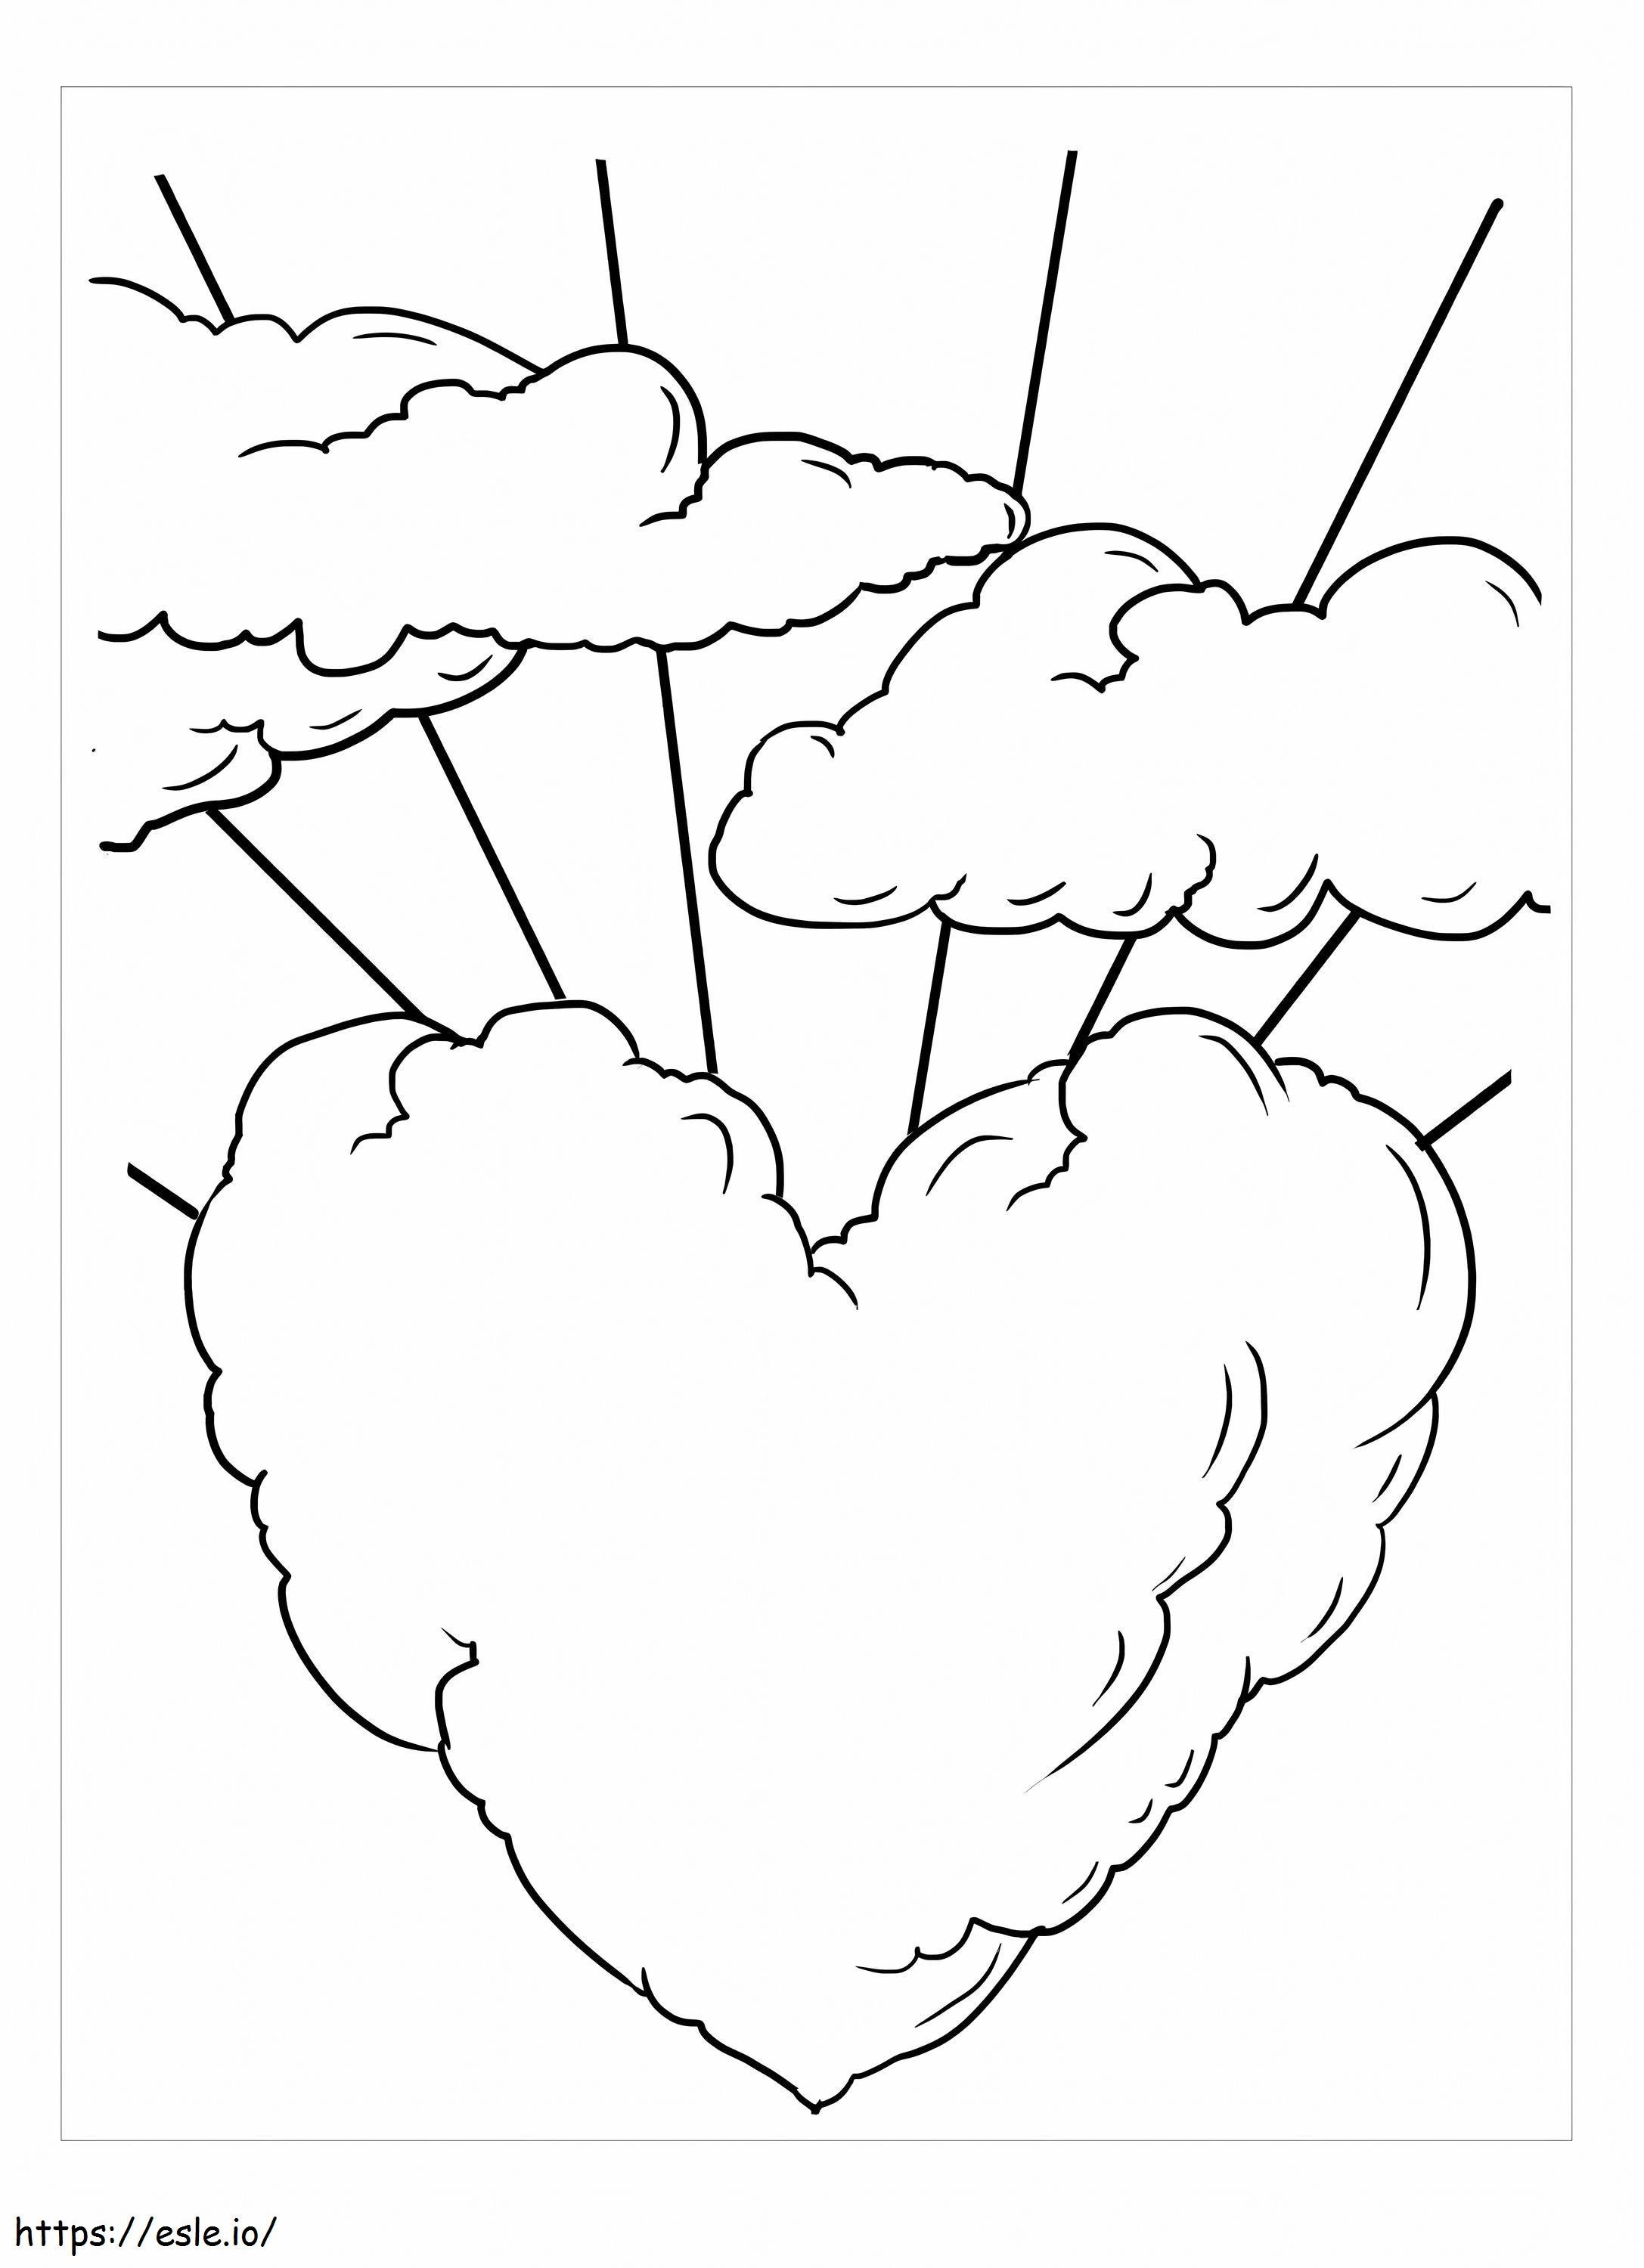 Heart Cloud coloring page